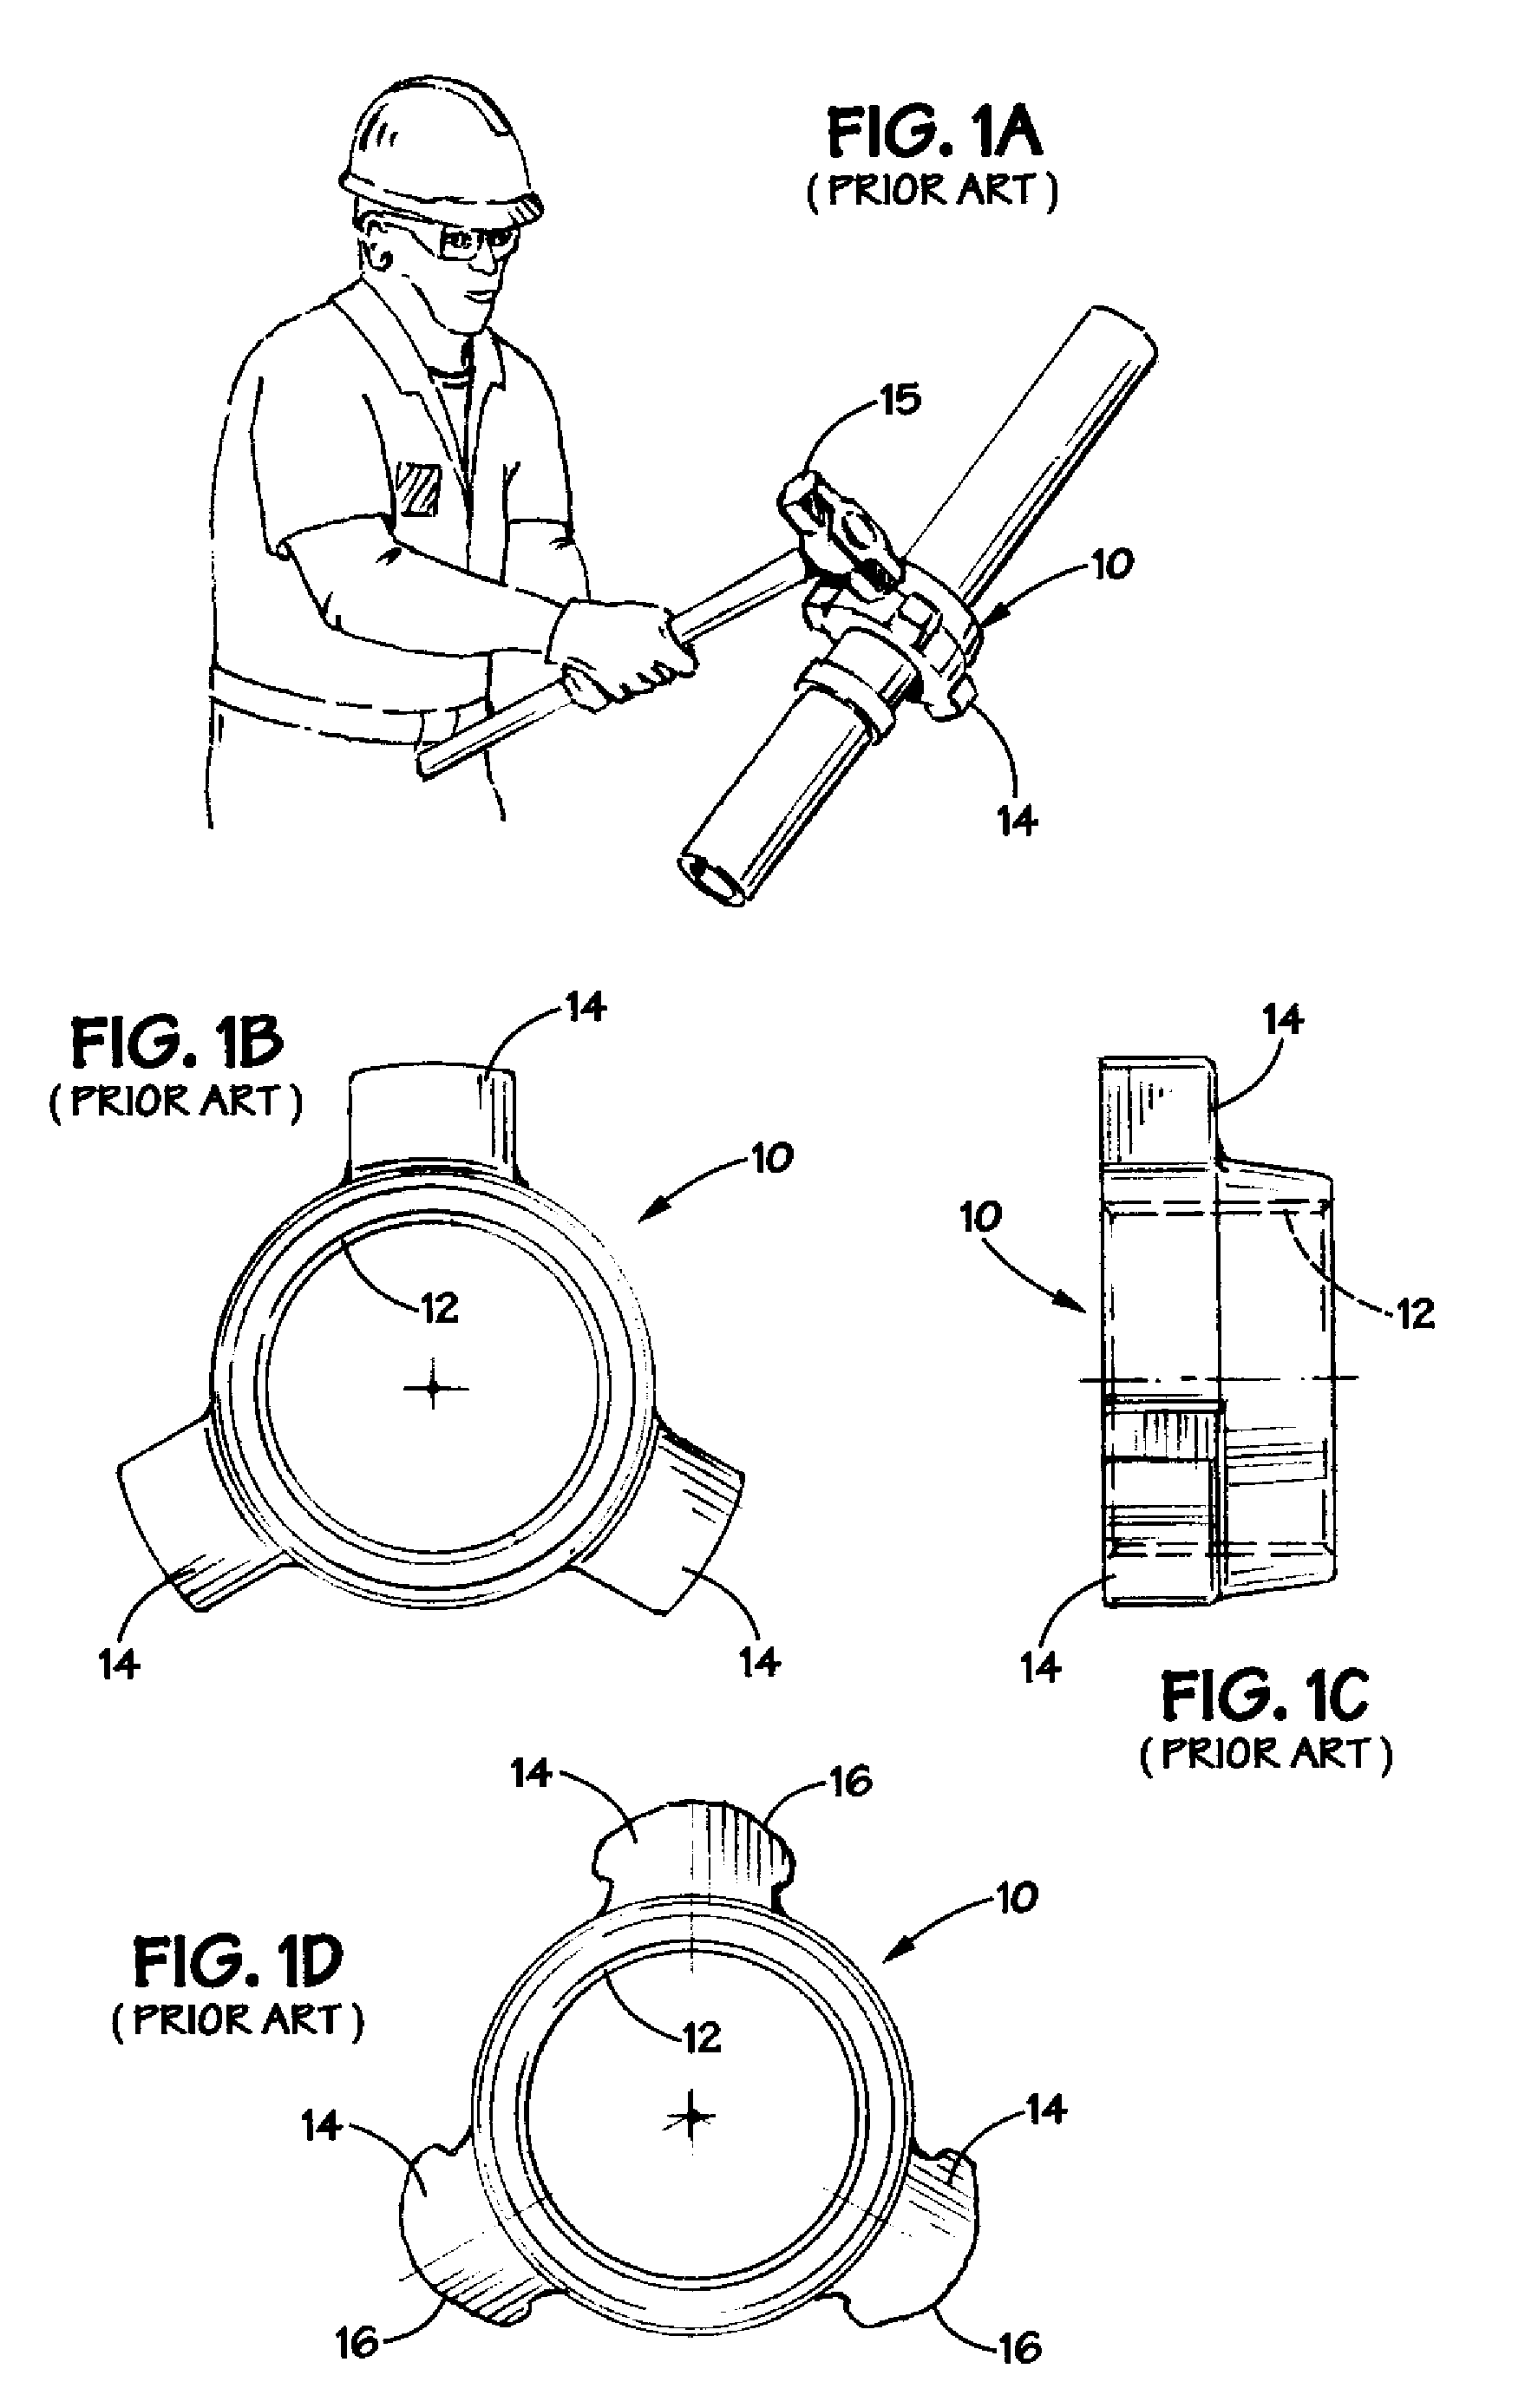 Threaded union nut and sliding hammer for rotating same